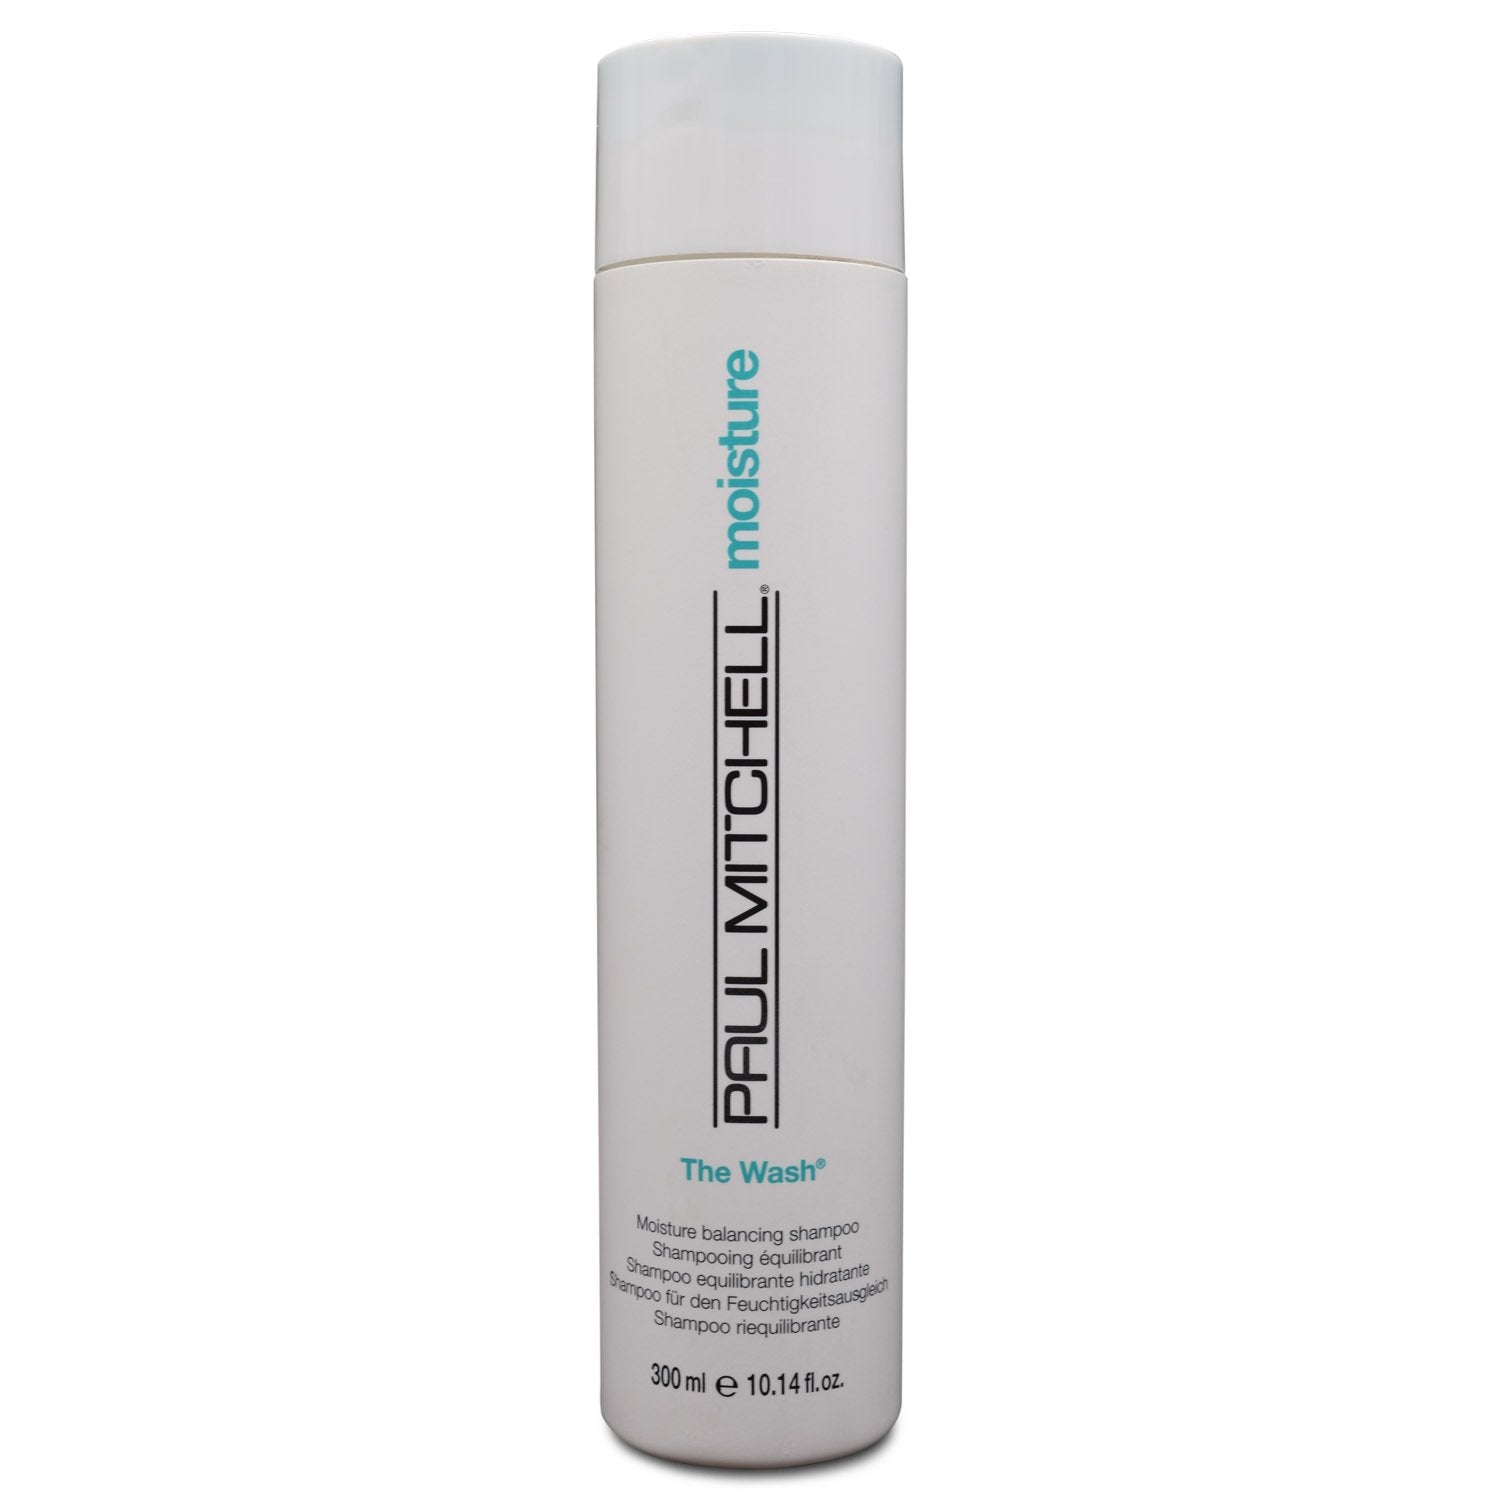 PAUL MITCHELL THE RINSE BALANCING CONDITIONER 10.14 OZ 11360Hair ConditionerPAUL MITCHELL